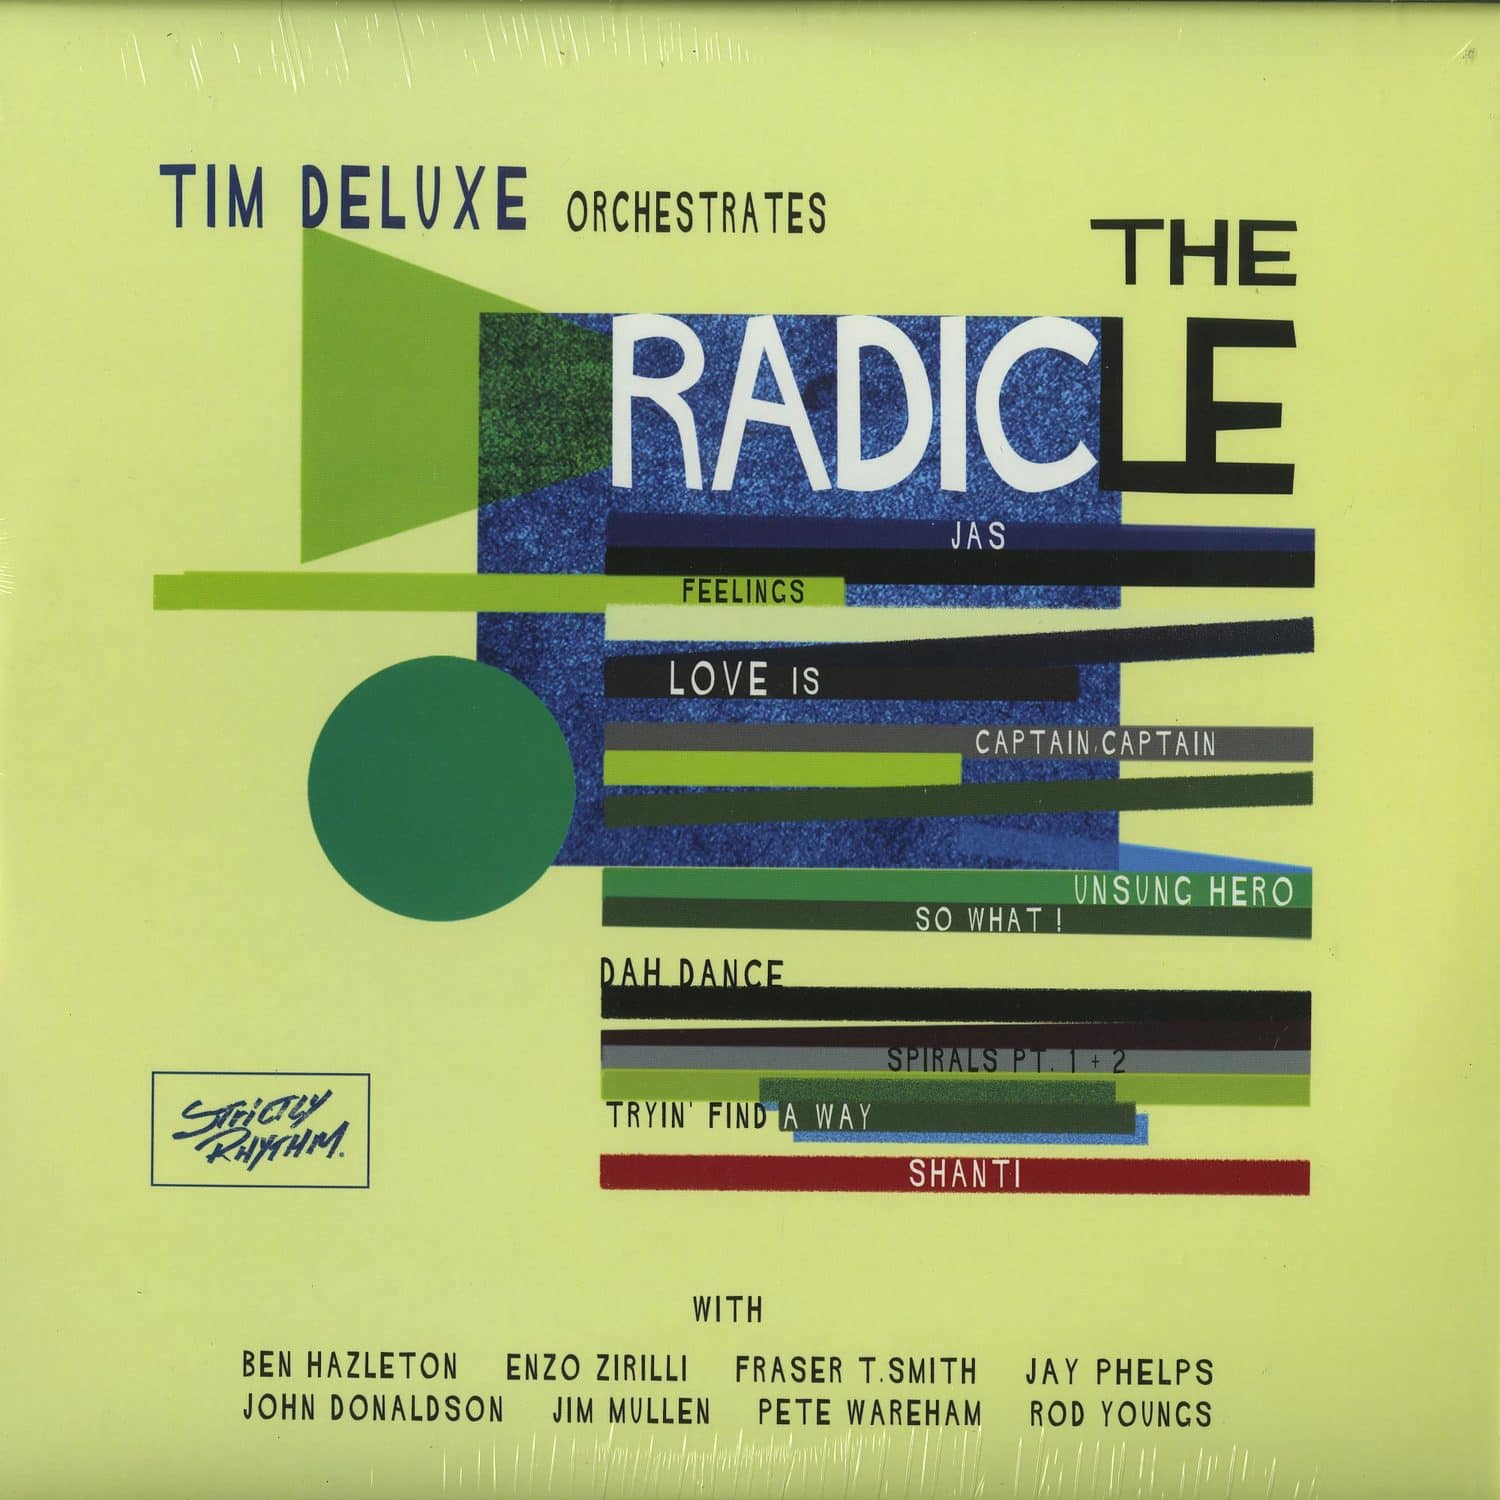 Tim Deluxe - THE RADICALE 